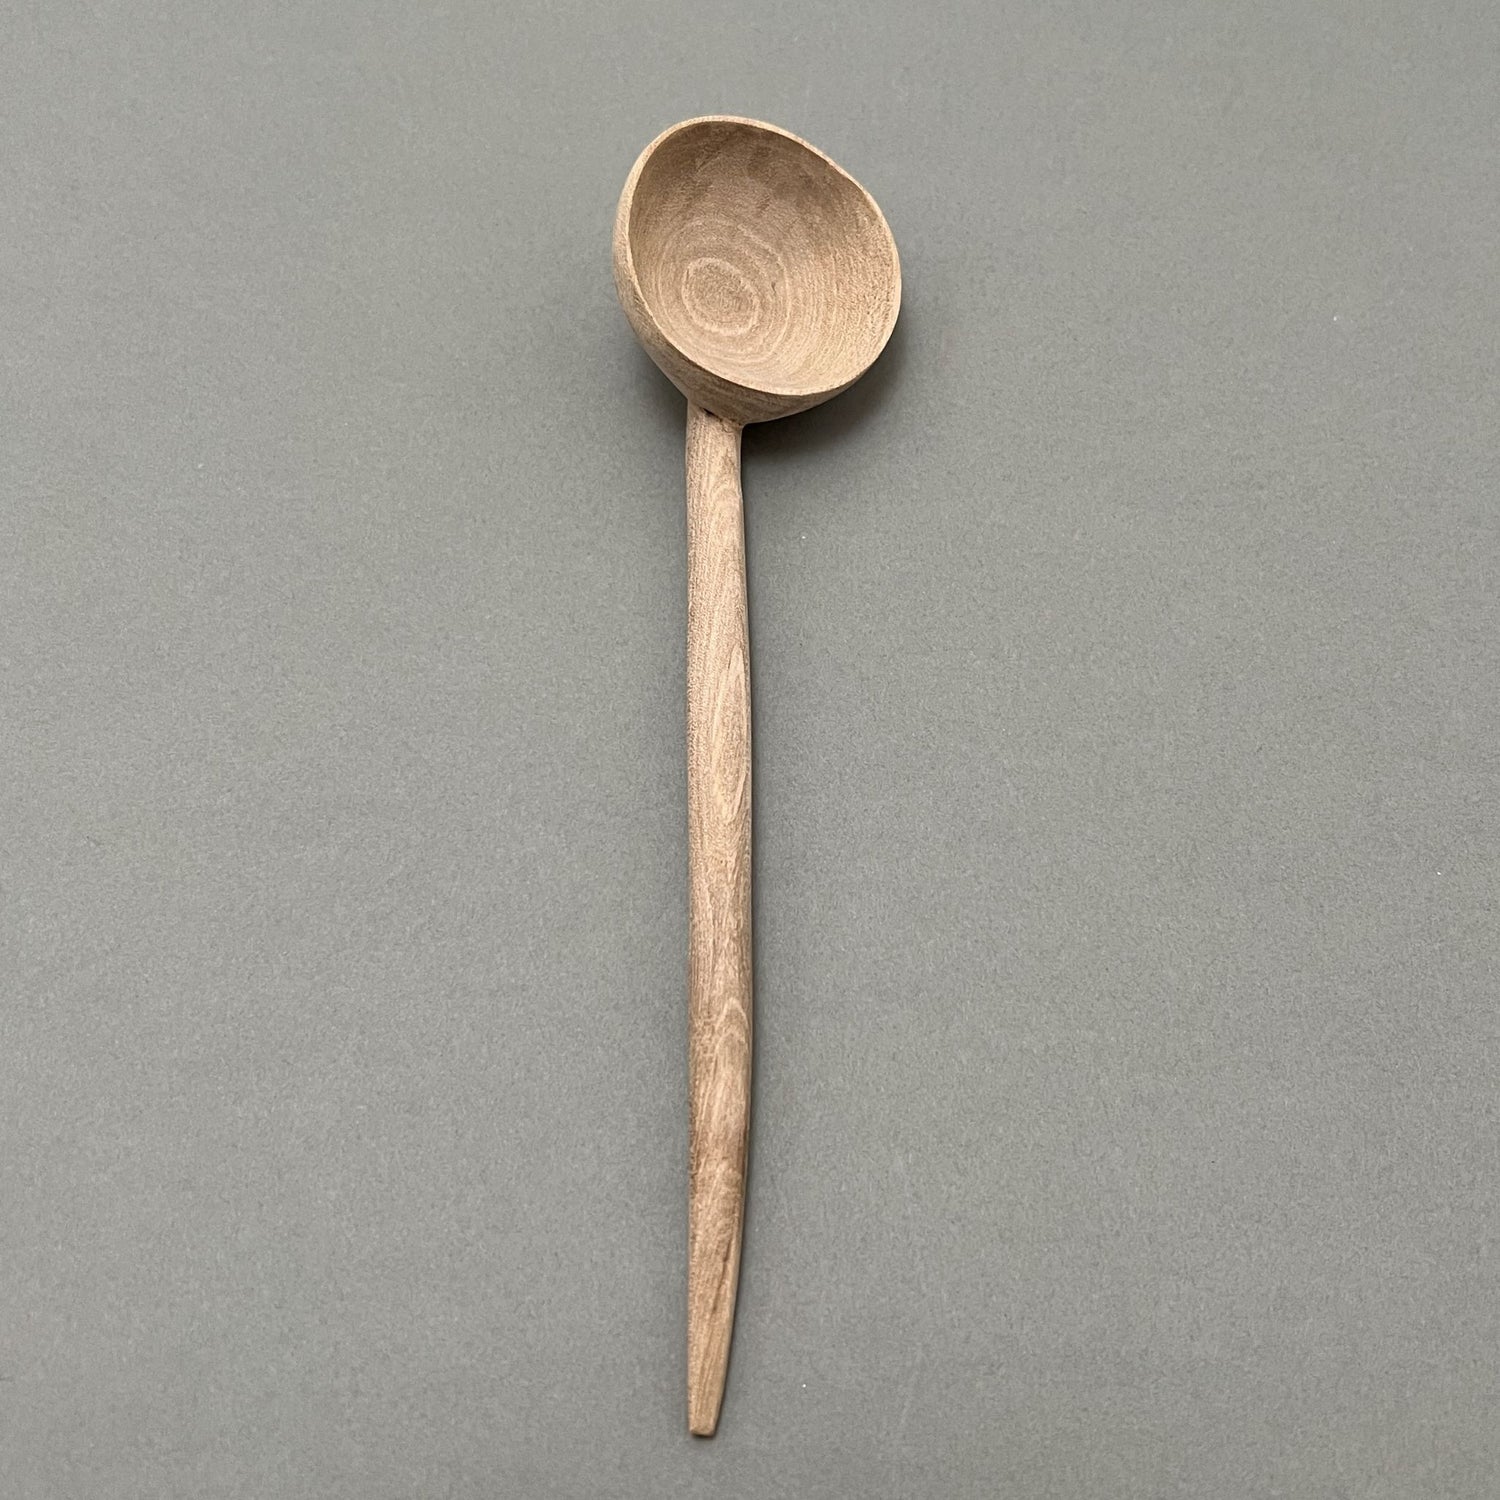 A wooden coffee scoop laying on a gray background